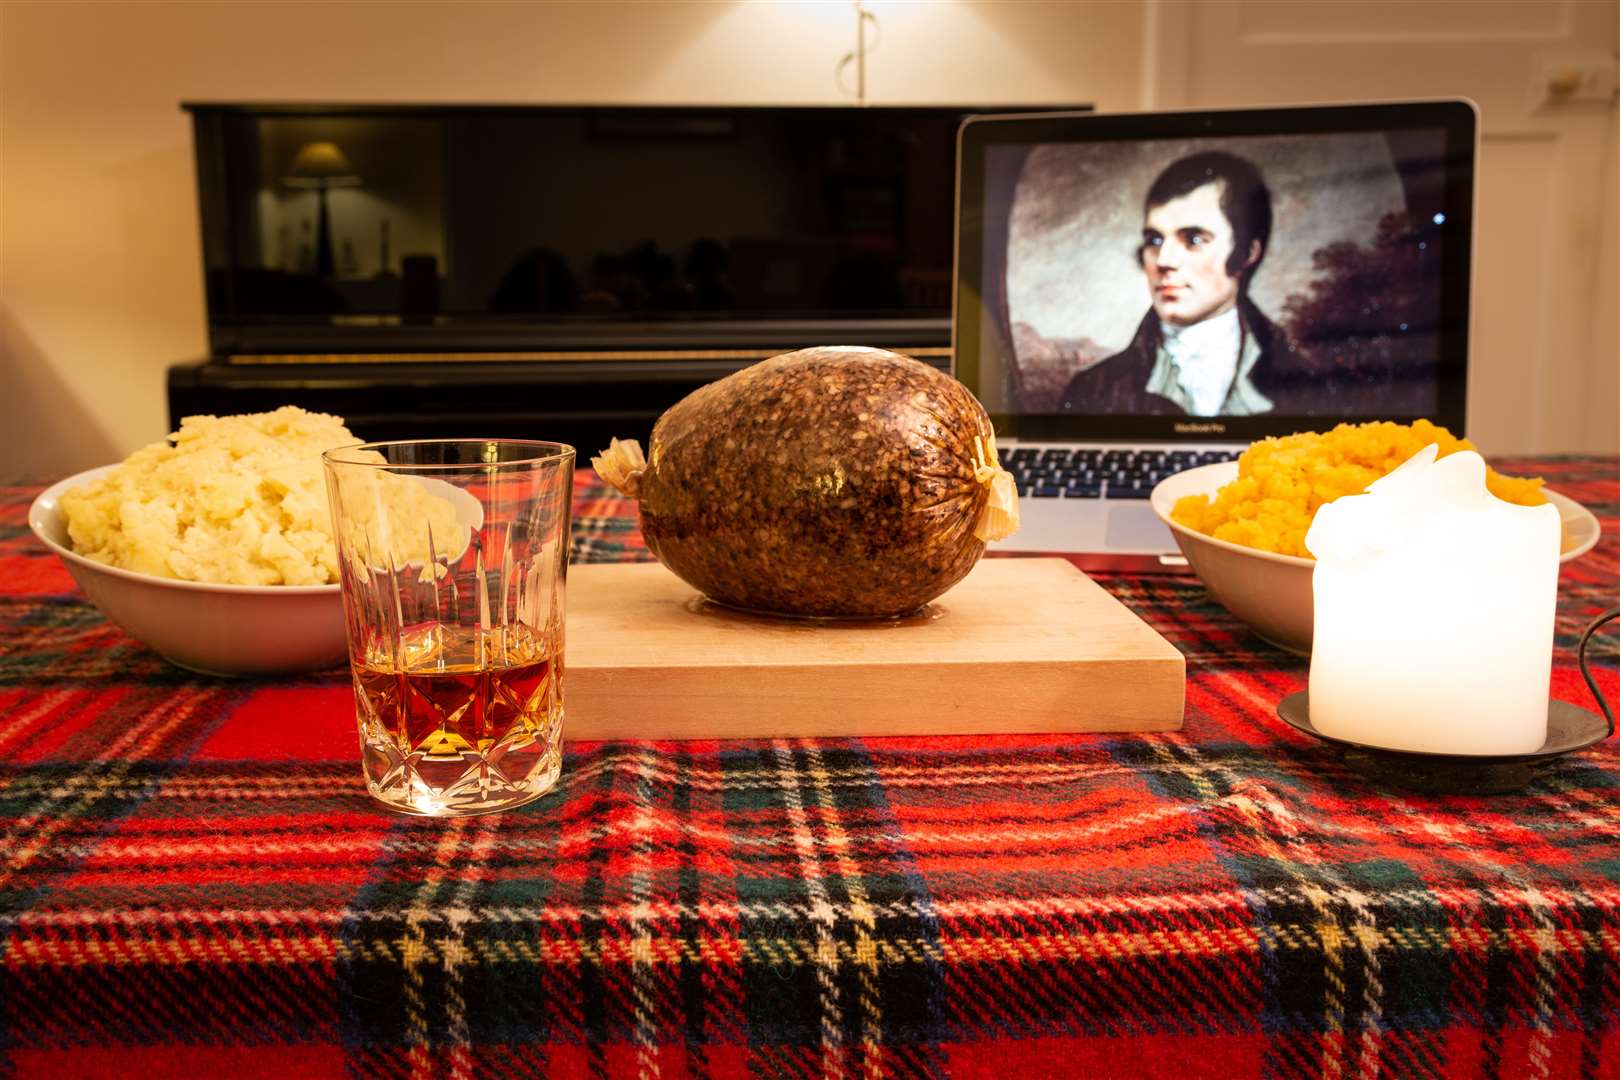 All the ingredients for a Burns Supper.